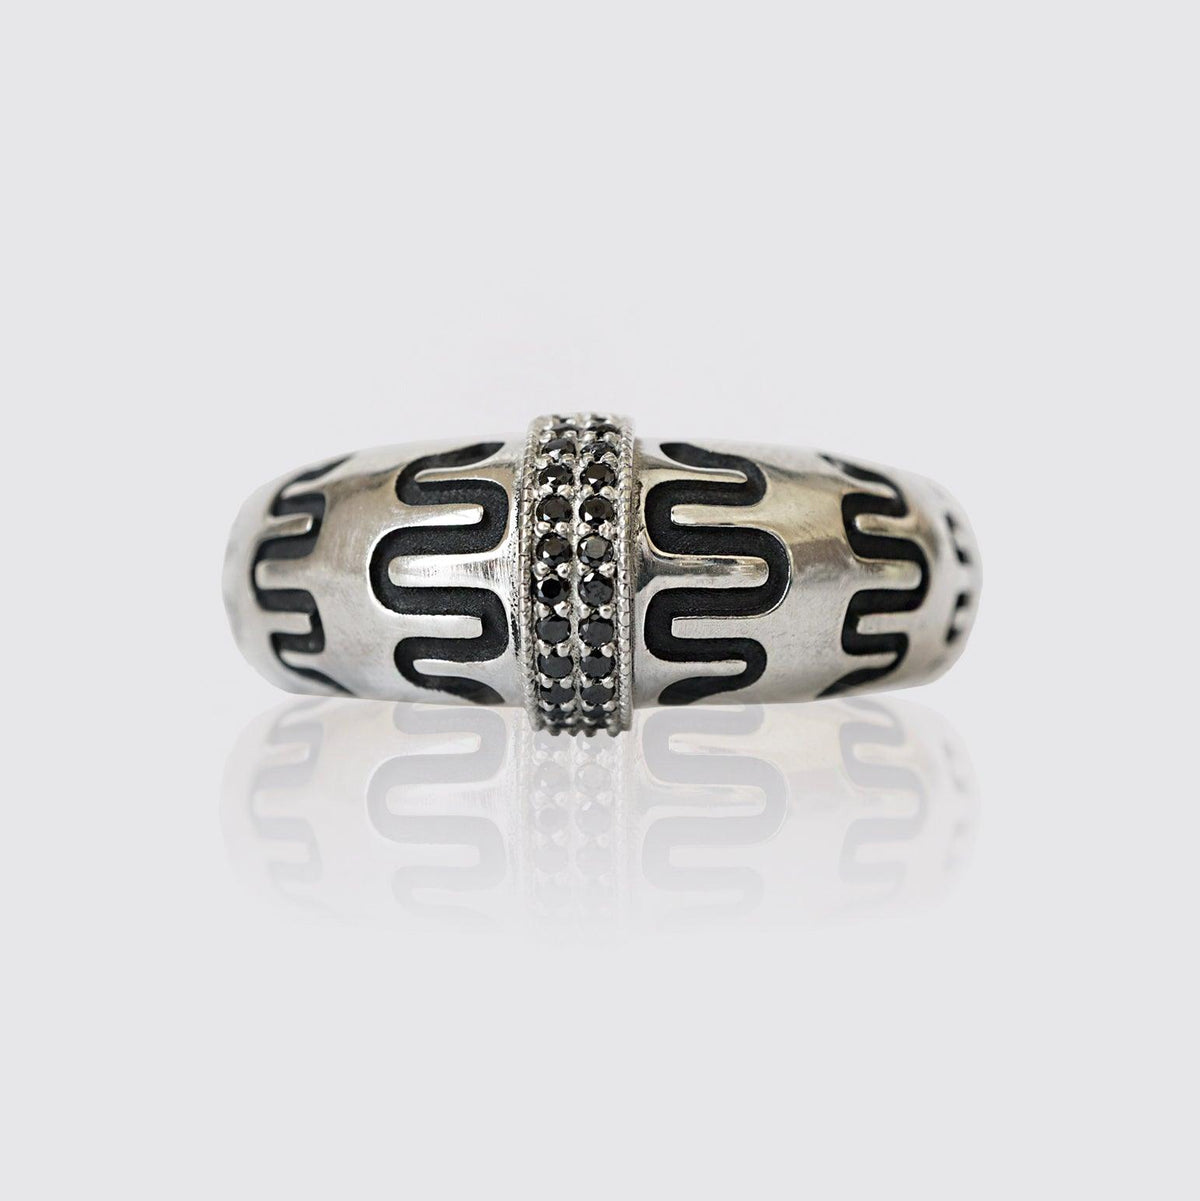 Maze Black Diamond Ring in Sterling Silver and 14K Gold, 9mm - Tippy Taste Jewelry